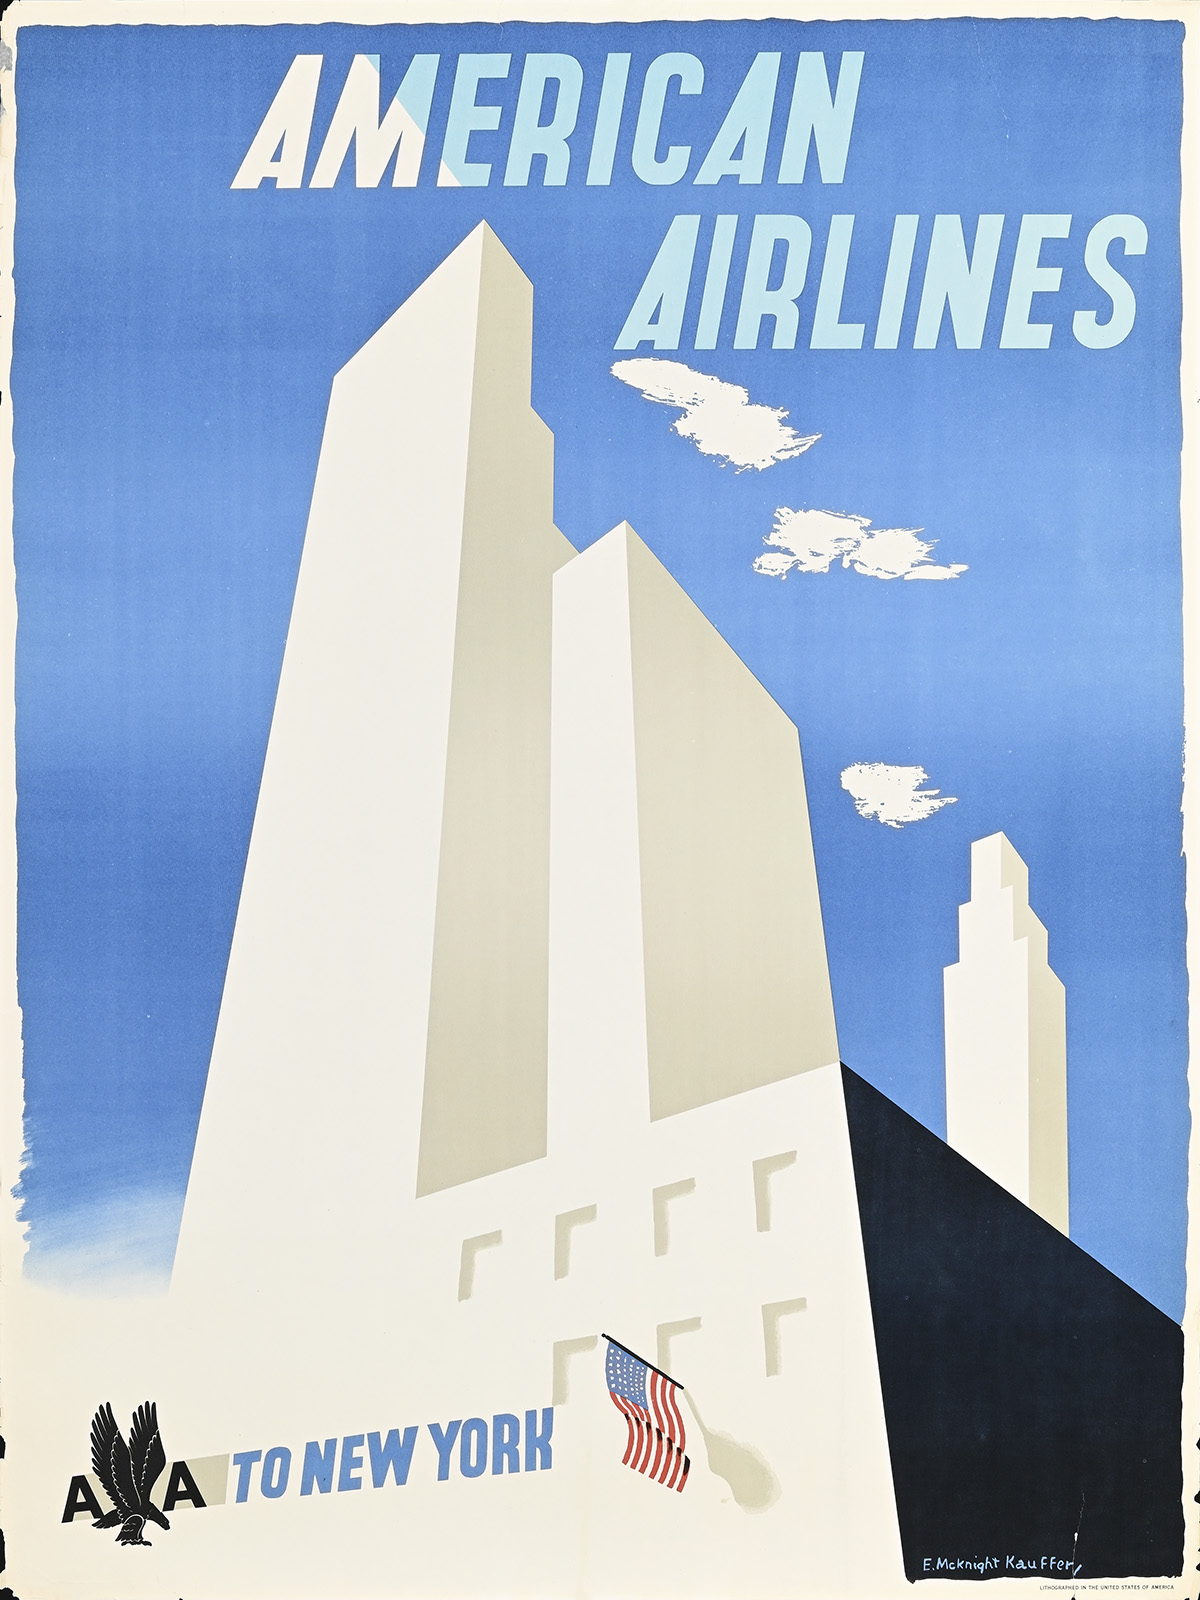 A poster of a tall rectangular white building against a blue sky, viewed from below.